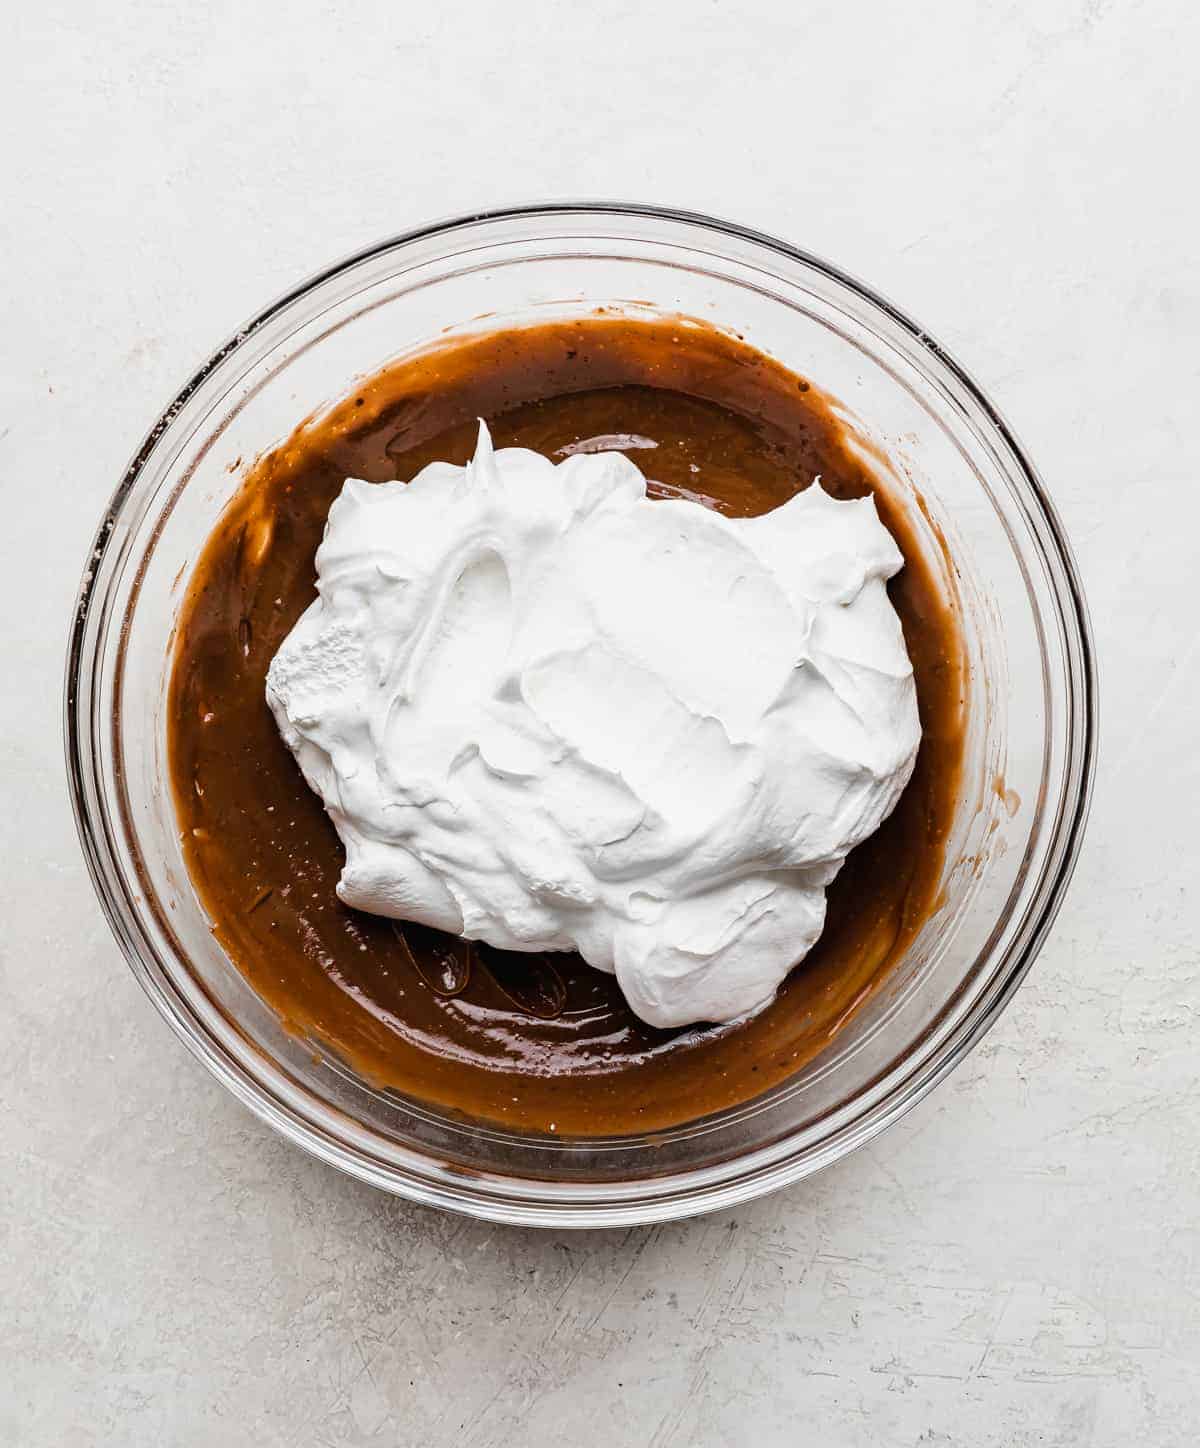 Whipped cream on top of brown chocolate pudding in a glass bowl.